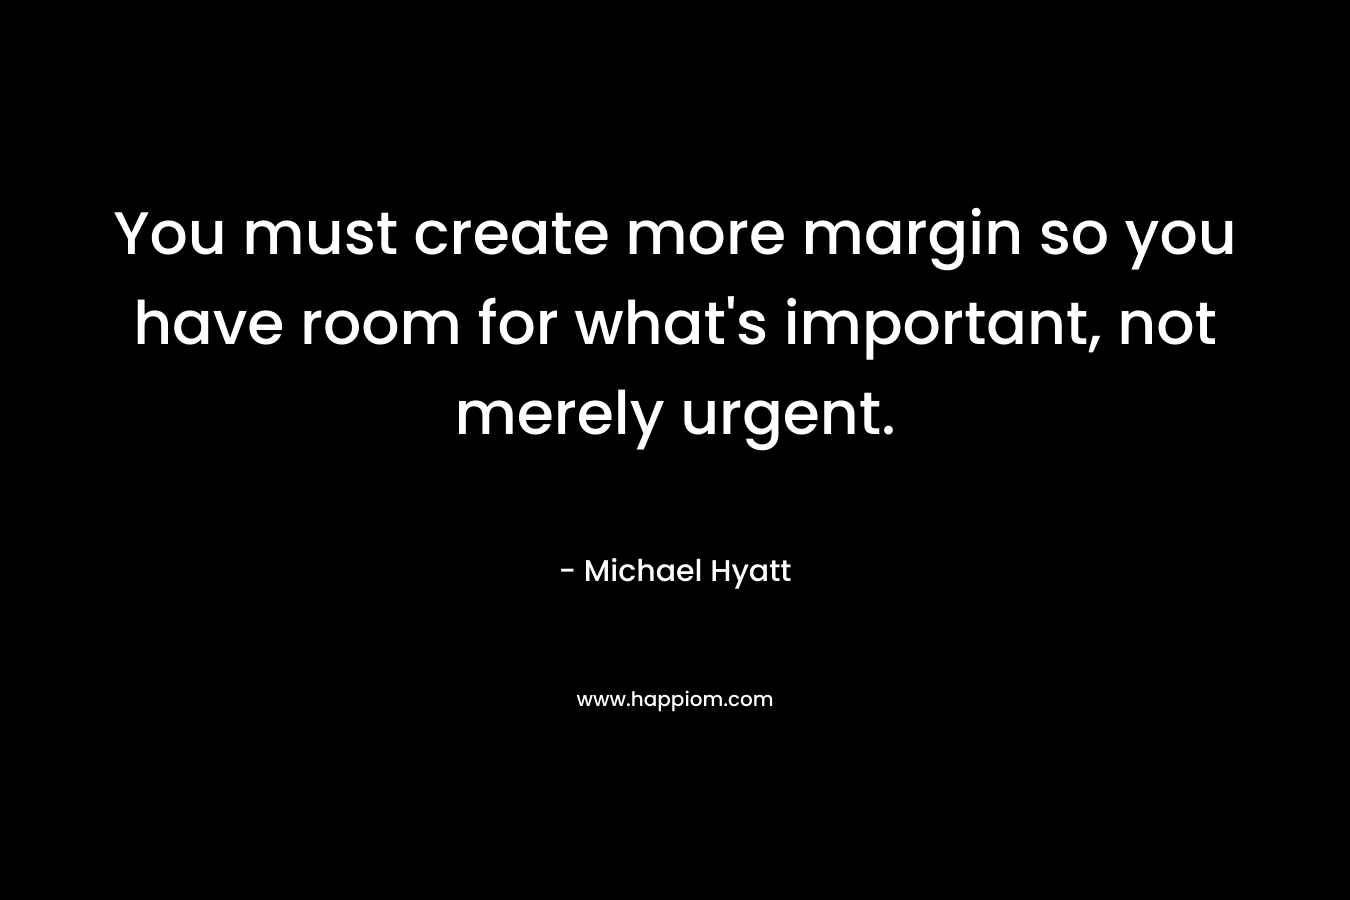 You must create more margin so you have room for what’s important, not merely urgent. – Michael Hyatt